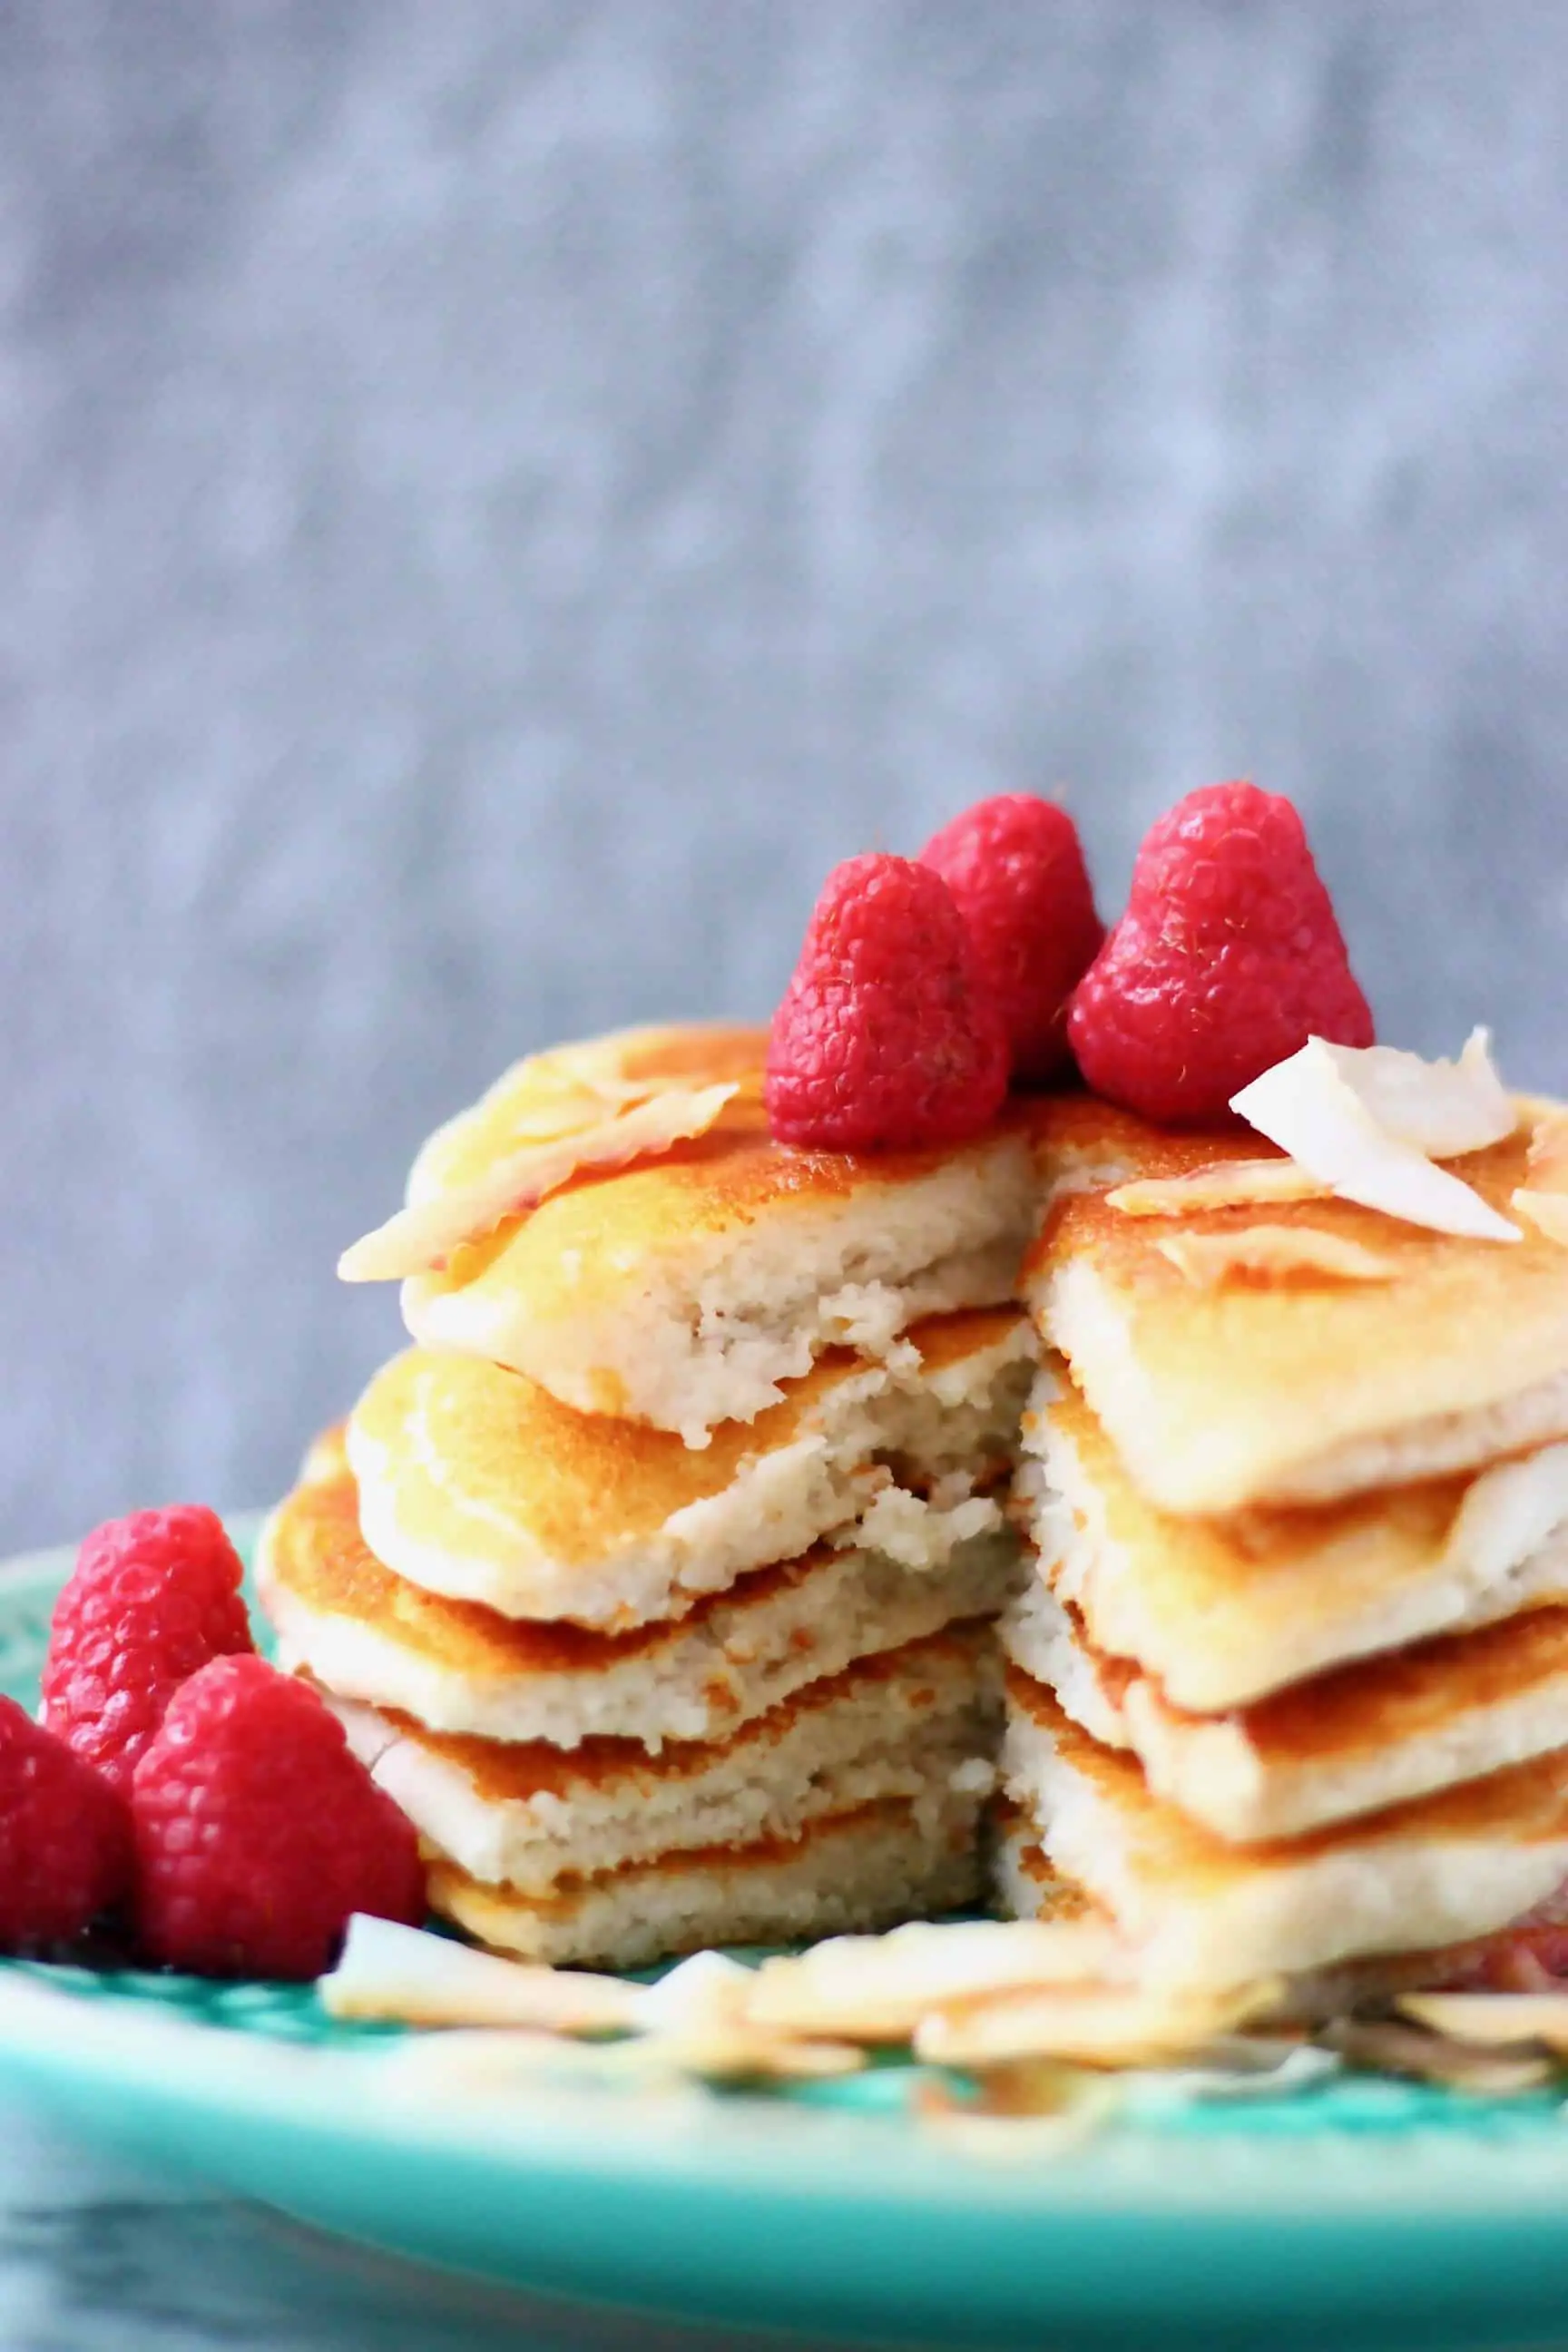 Five vegan coconut flour pancakes stacked in a pile decorated with fresh raspberries on a green plate